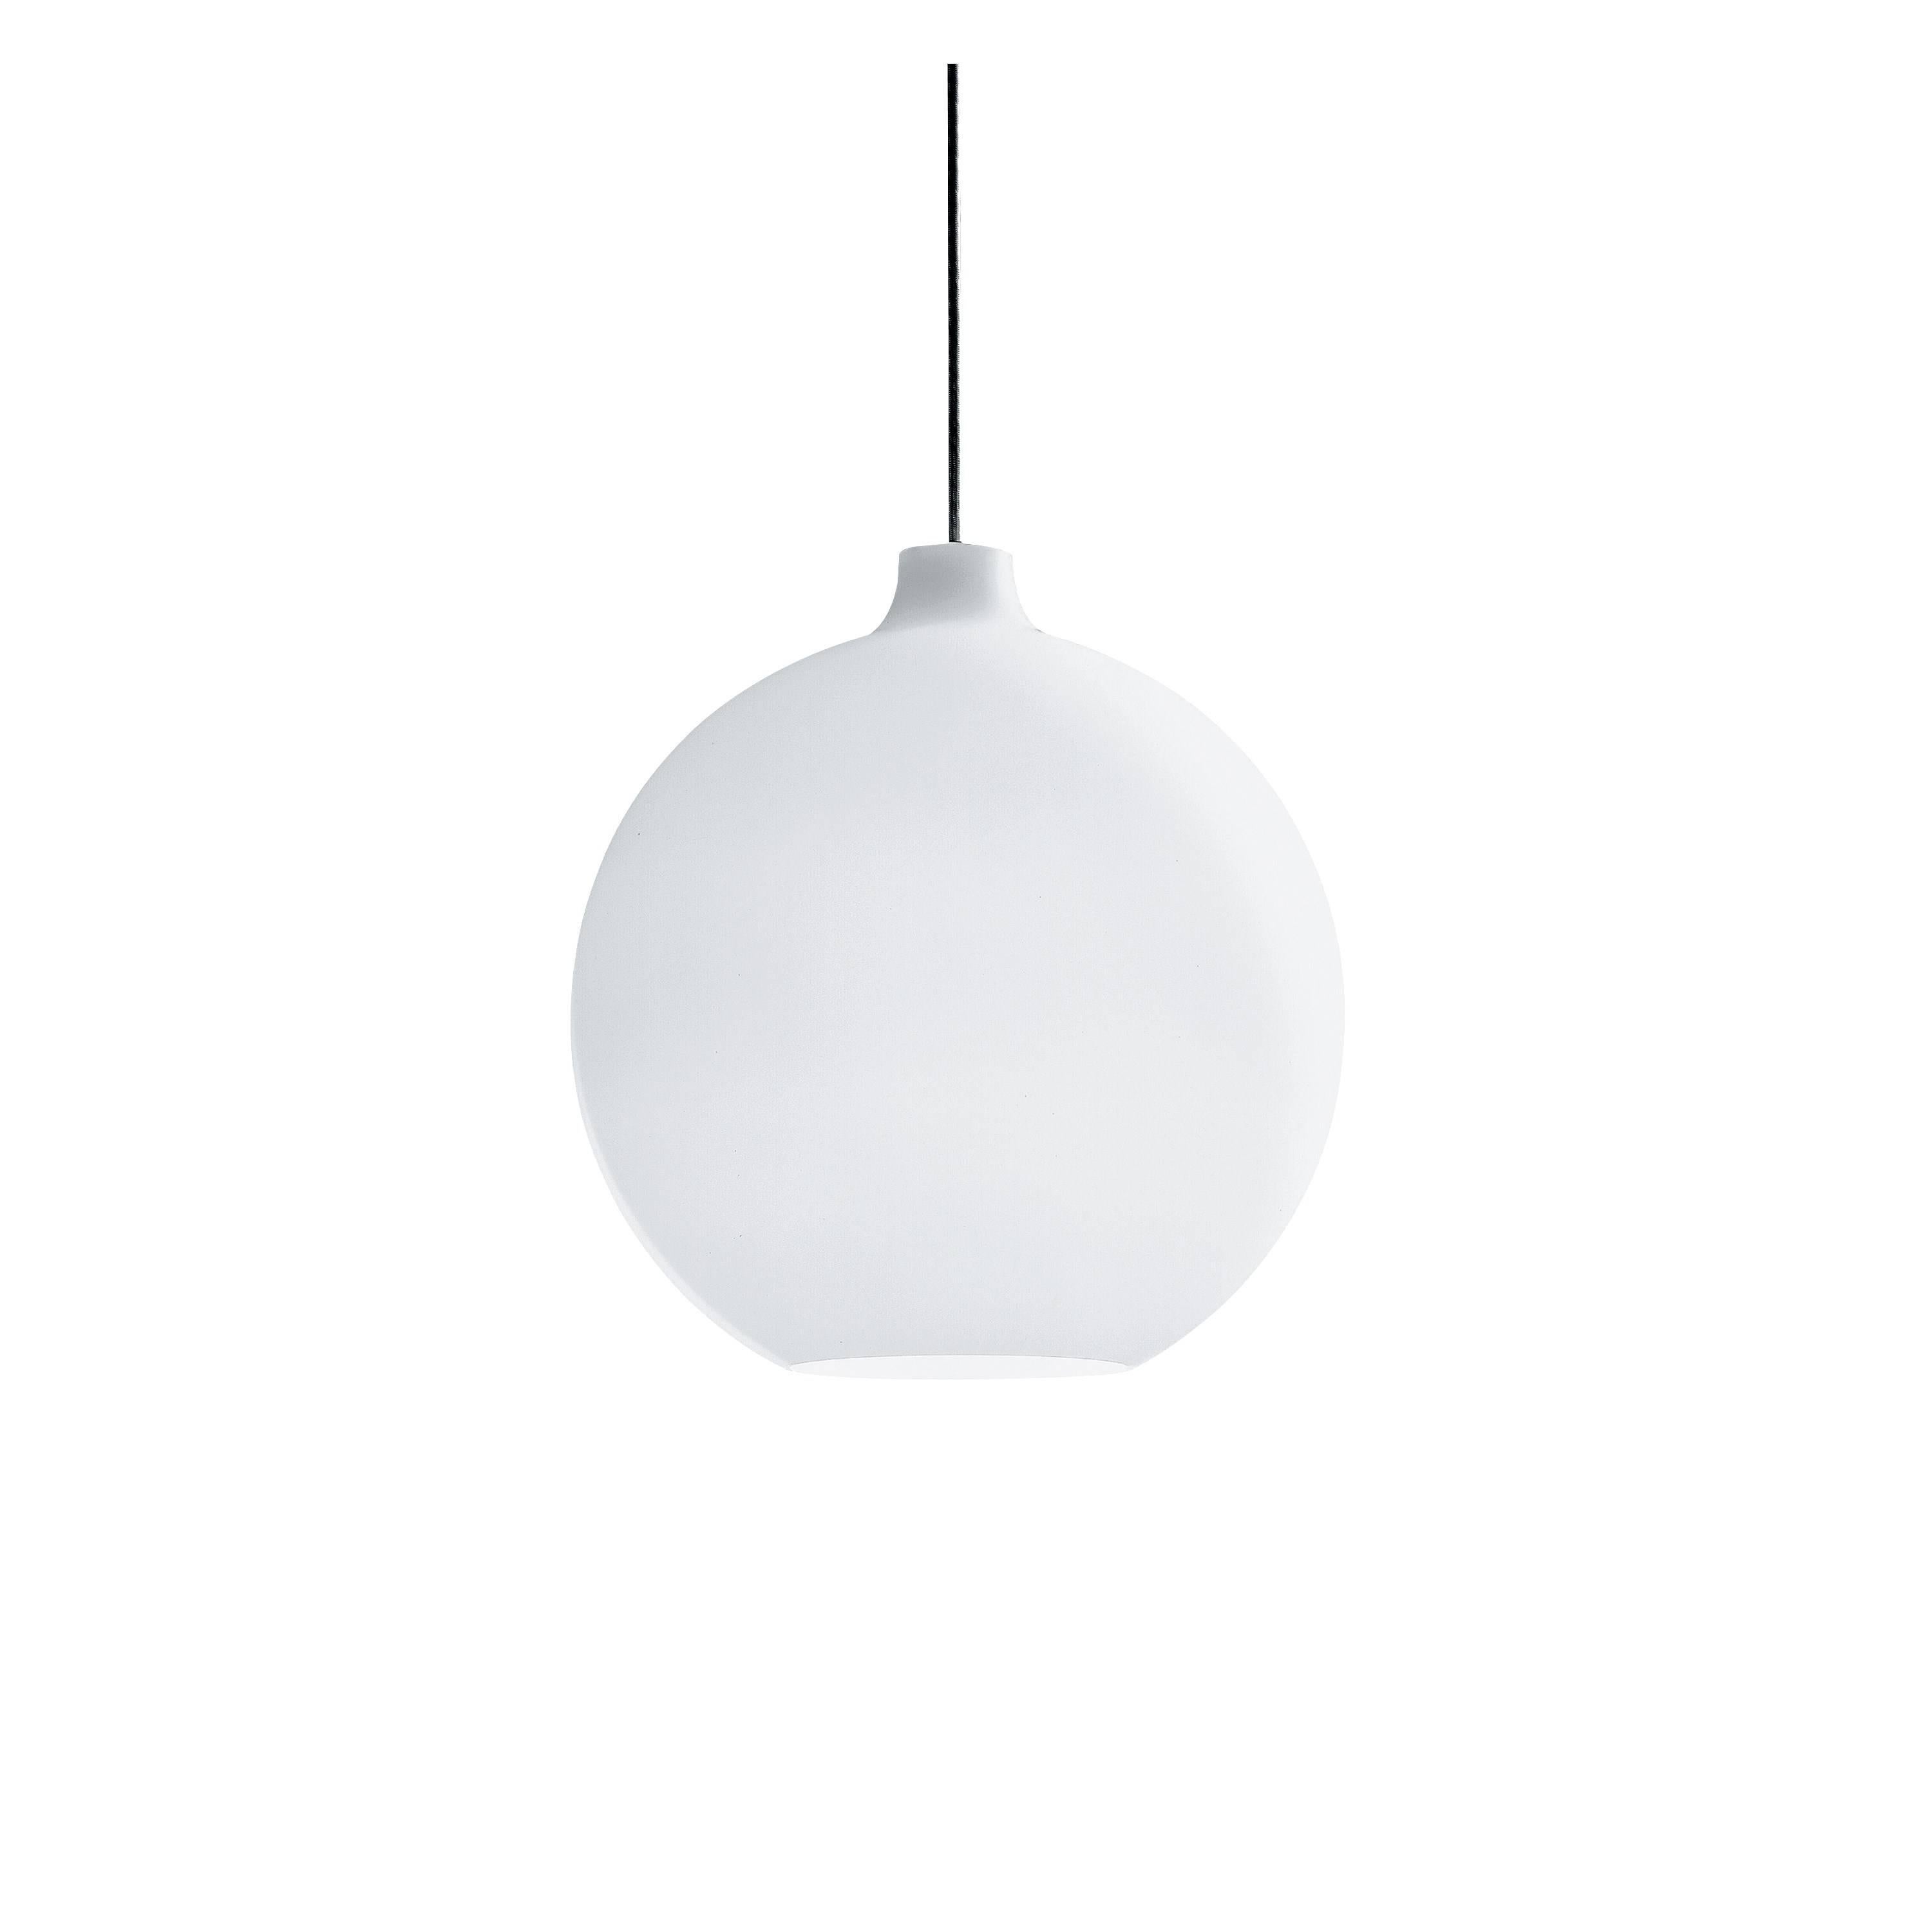 Large Vilhelm Wohlert satellite pendants for Louis Poulsen. The Wohlert pendant light is composed of a hand blown white opal glass shade and brushed steel stem. Wohlert designed the original satellite light in 1959 as a fixture that can suit various